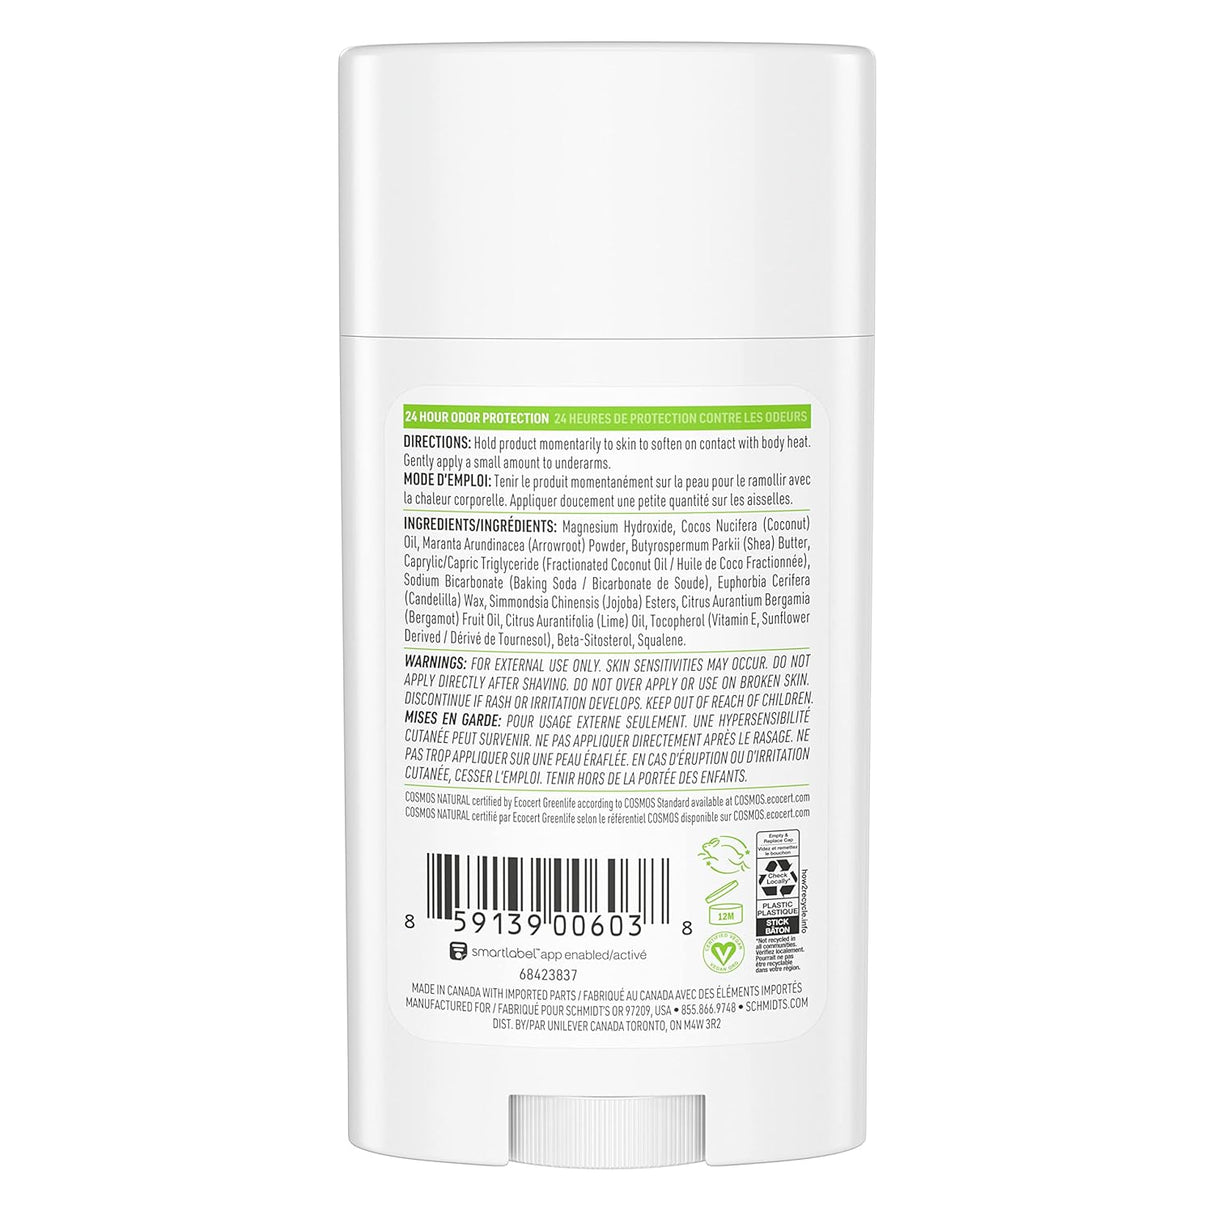 Schmidt's Aluminum Free Natural Deodorant For Women And Men, Bergamot & Lime With 24 Hour Odor Protection 2.65oz